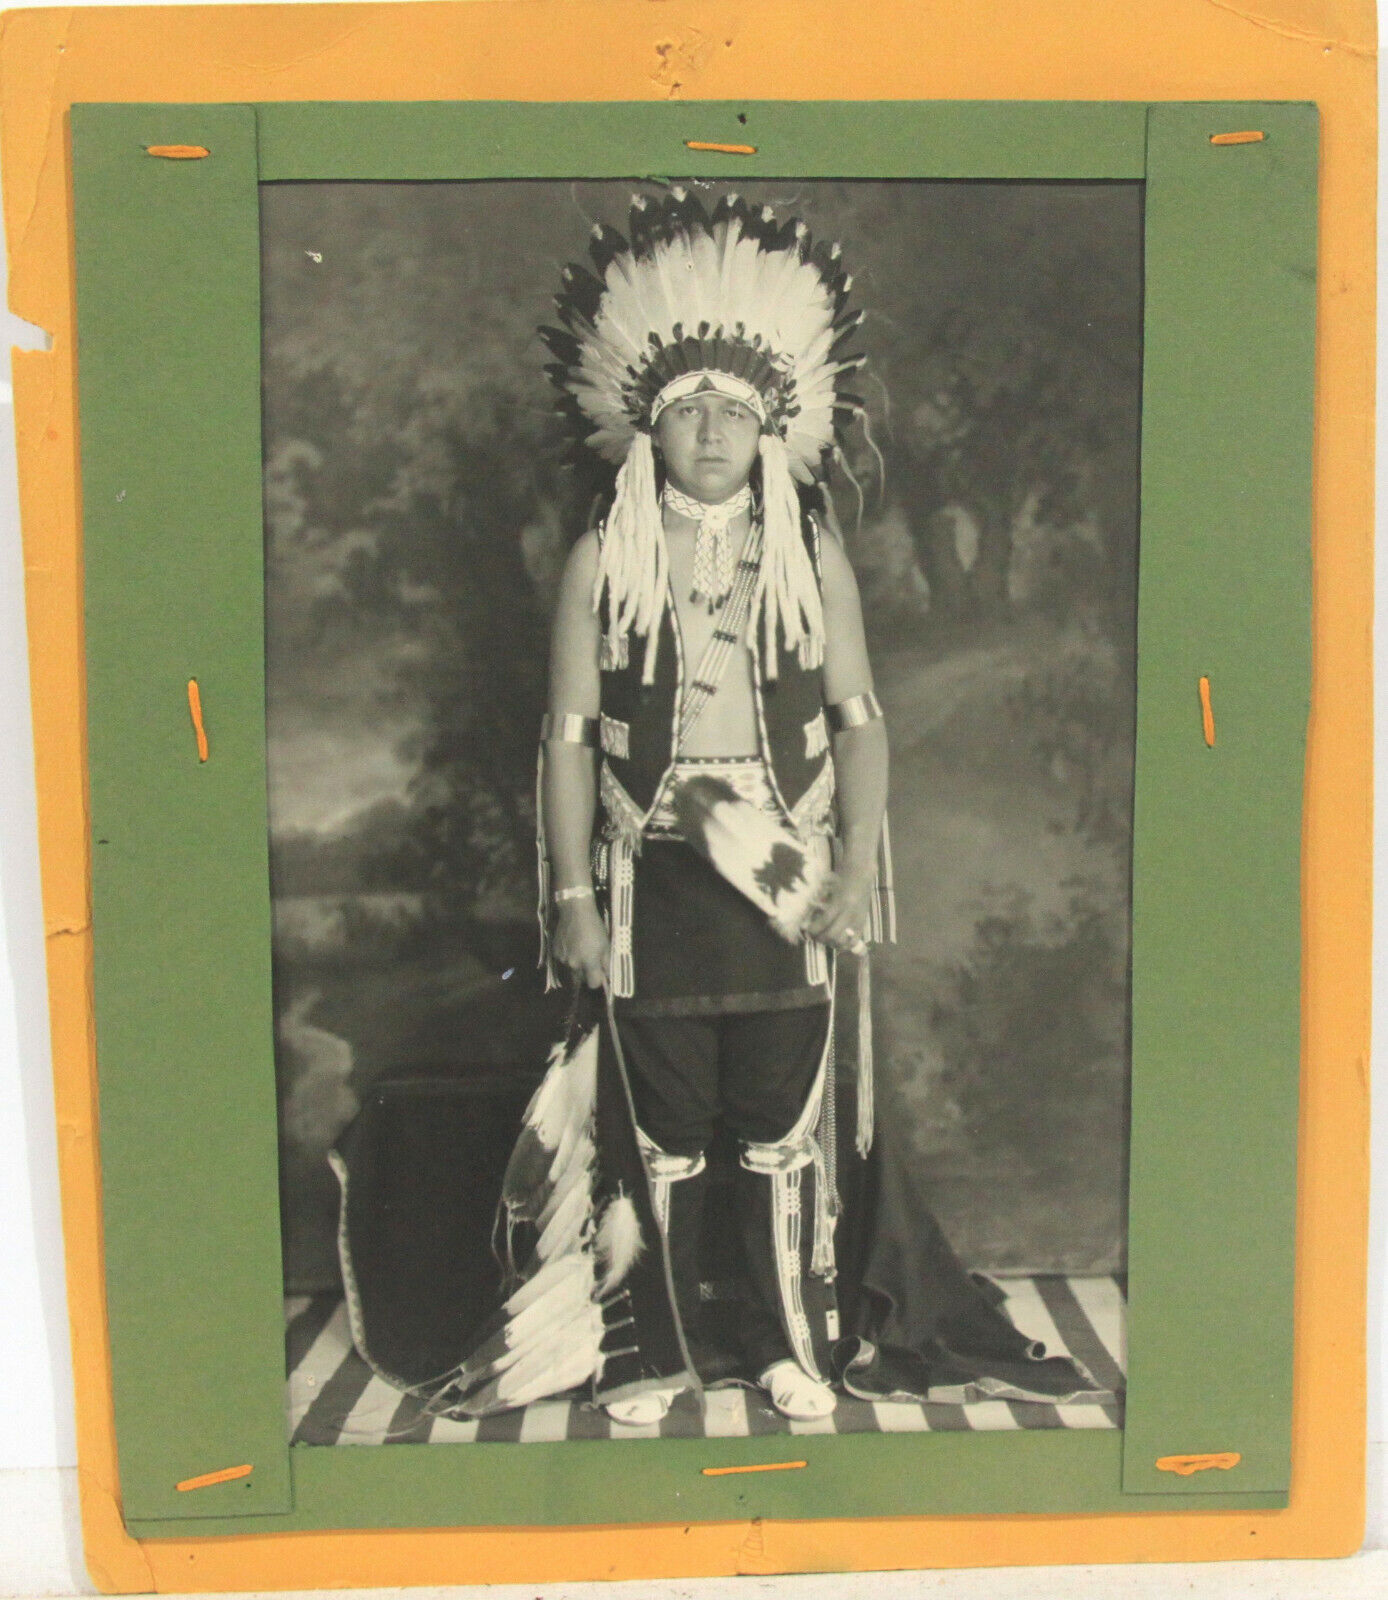 BW Photo of Osage Indian Chief in Native Garb – Handmade and Sewn Mount c1900